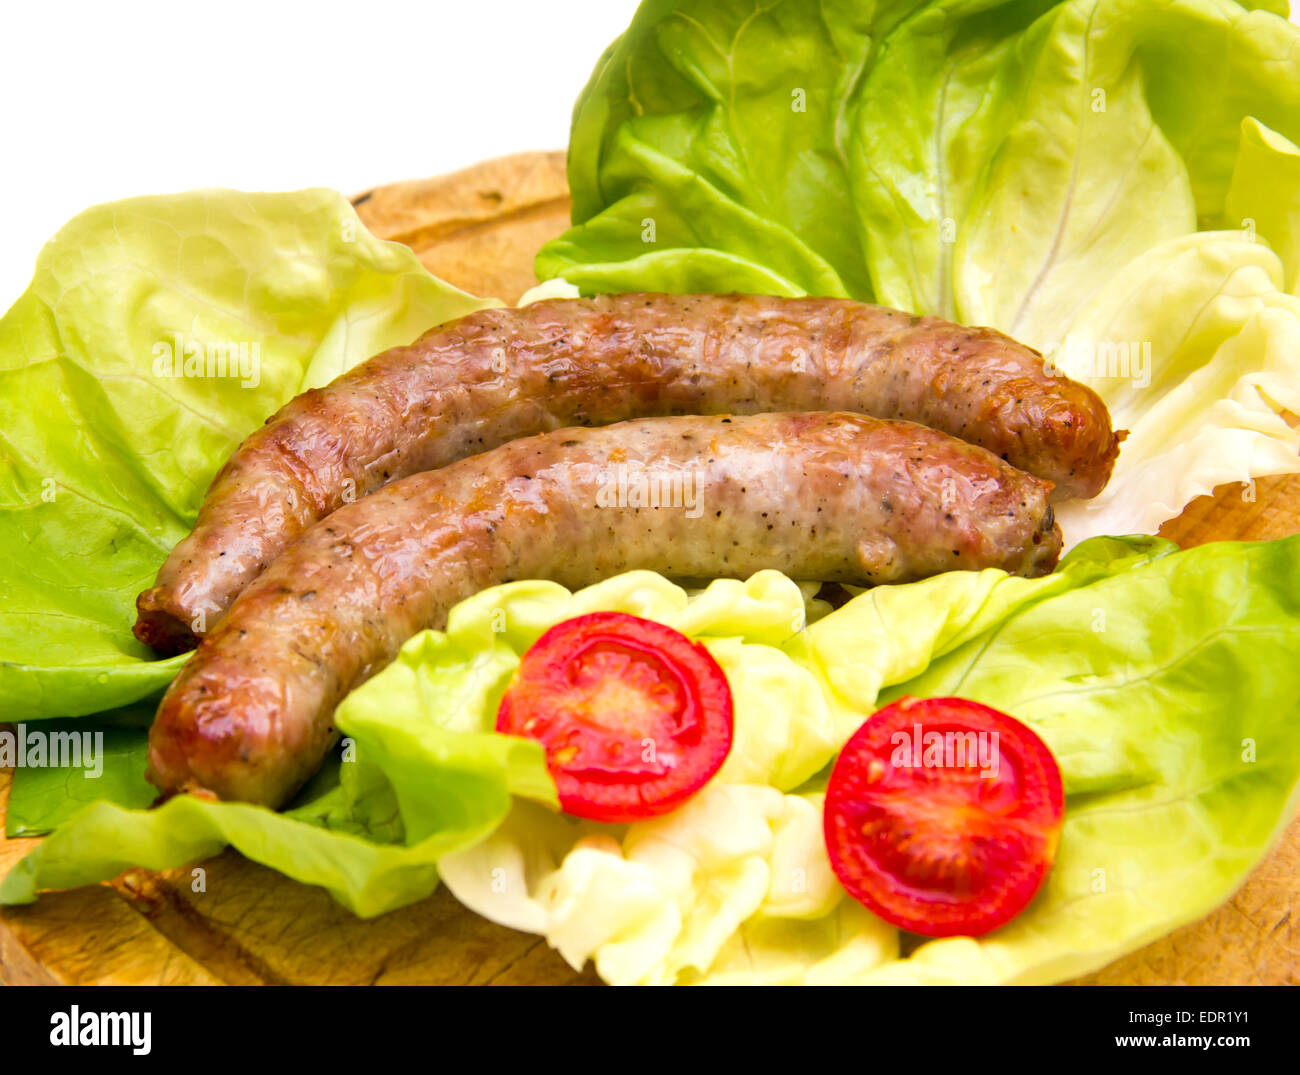 Sausage on wooden cutting board with salad Stock Photo